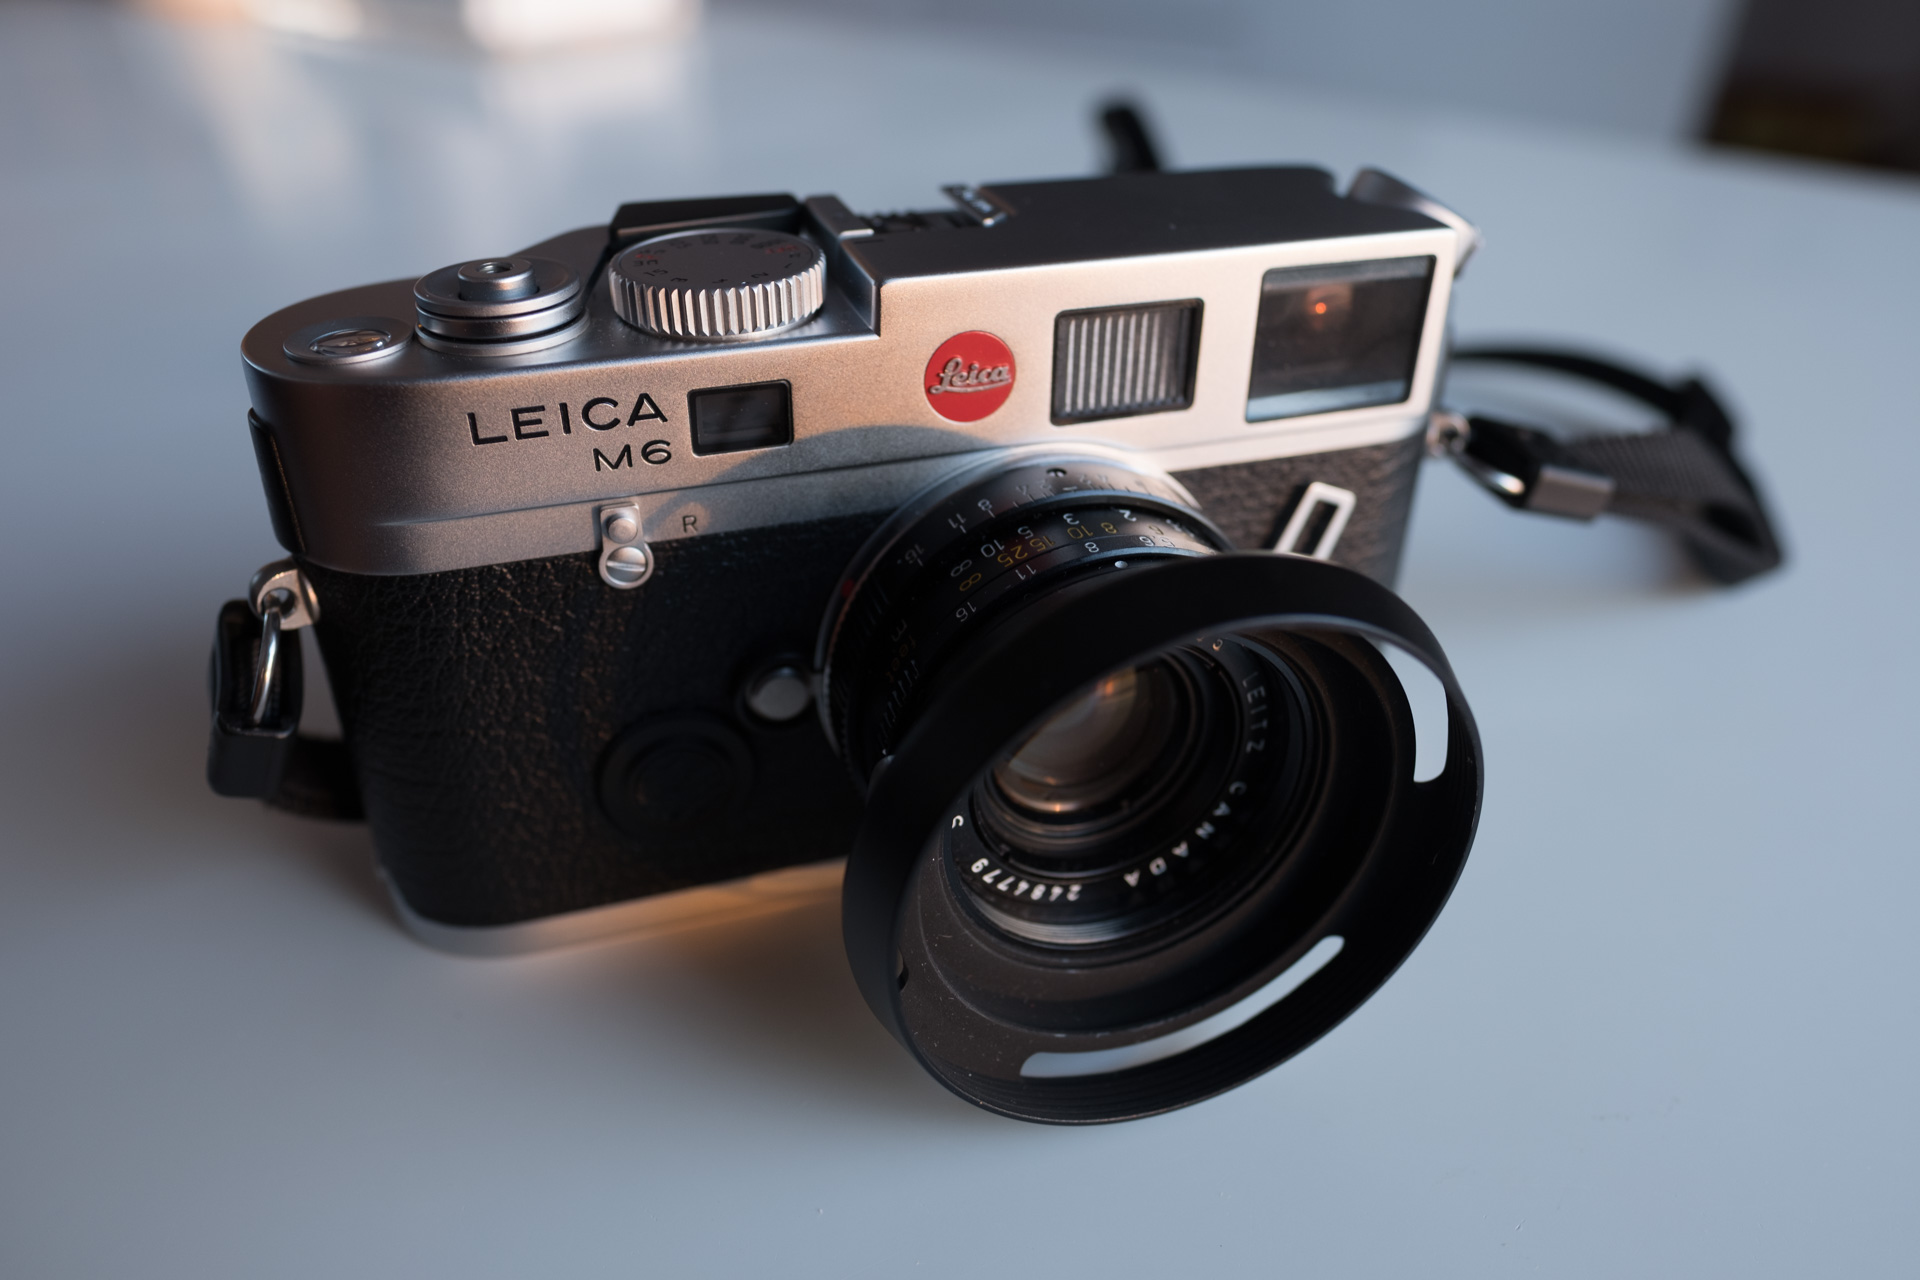 Leica M6 - The Jennifer Aniston of Film Cameras Possibly